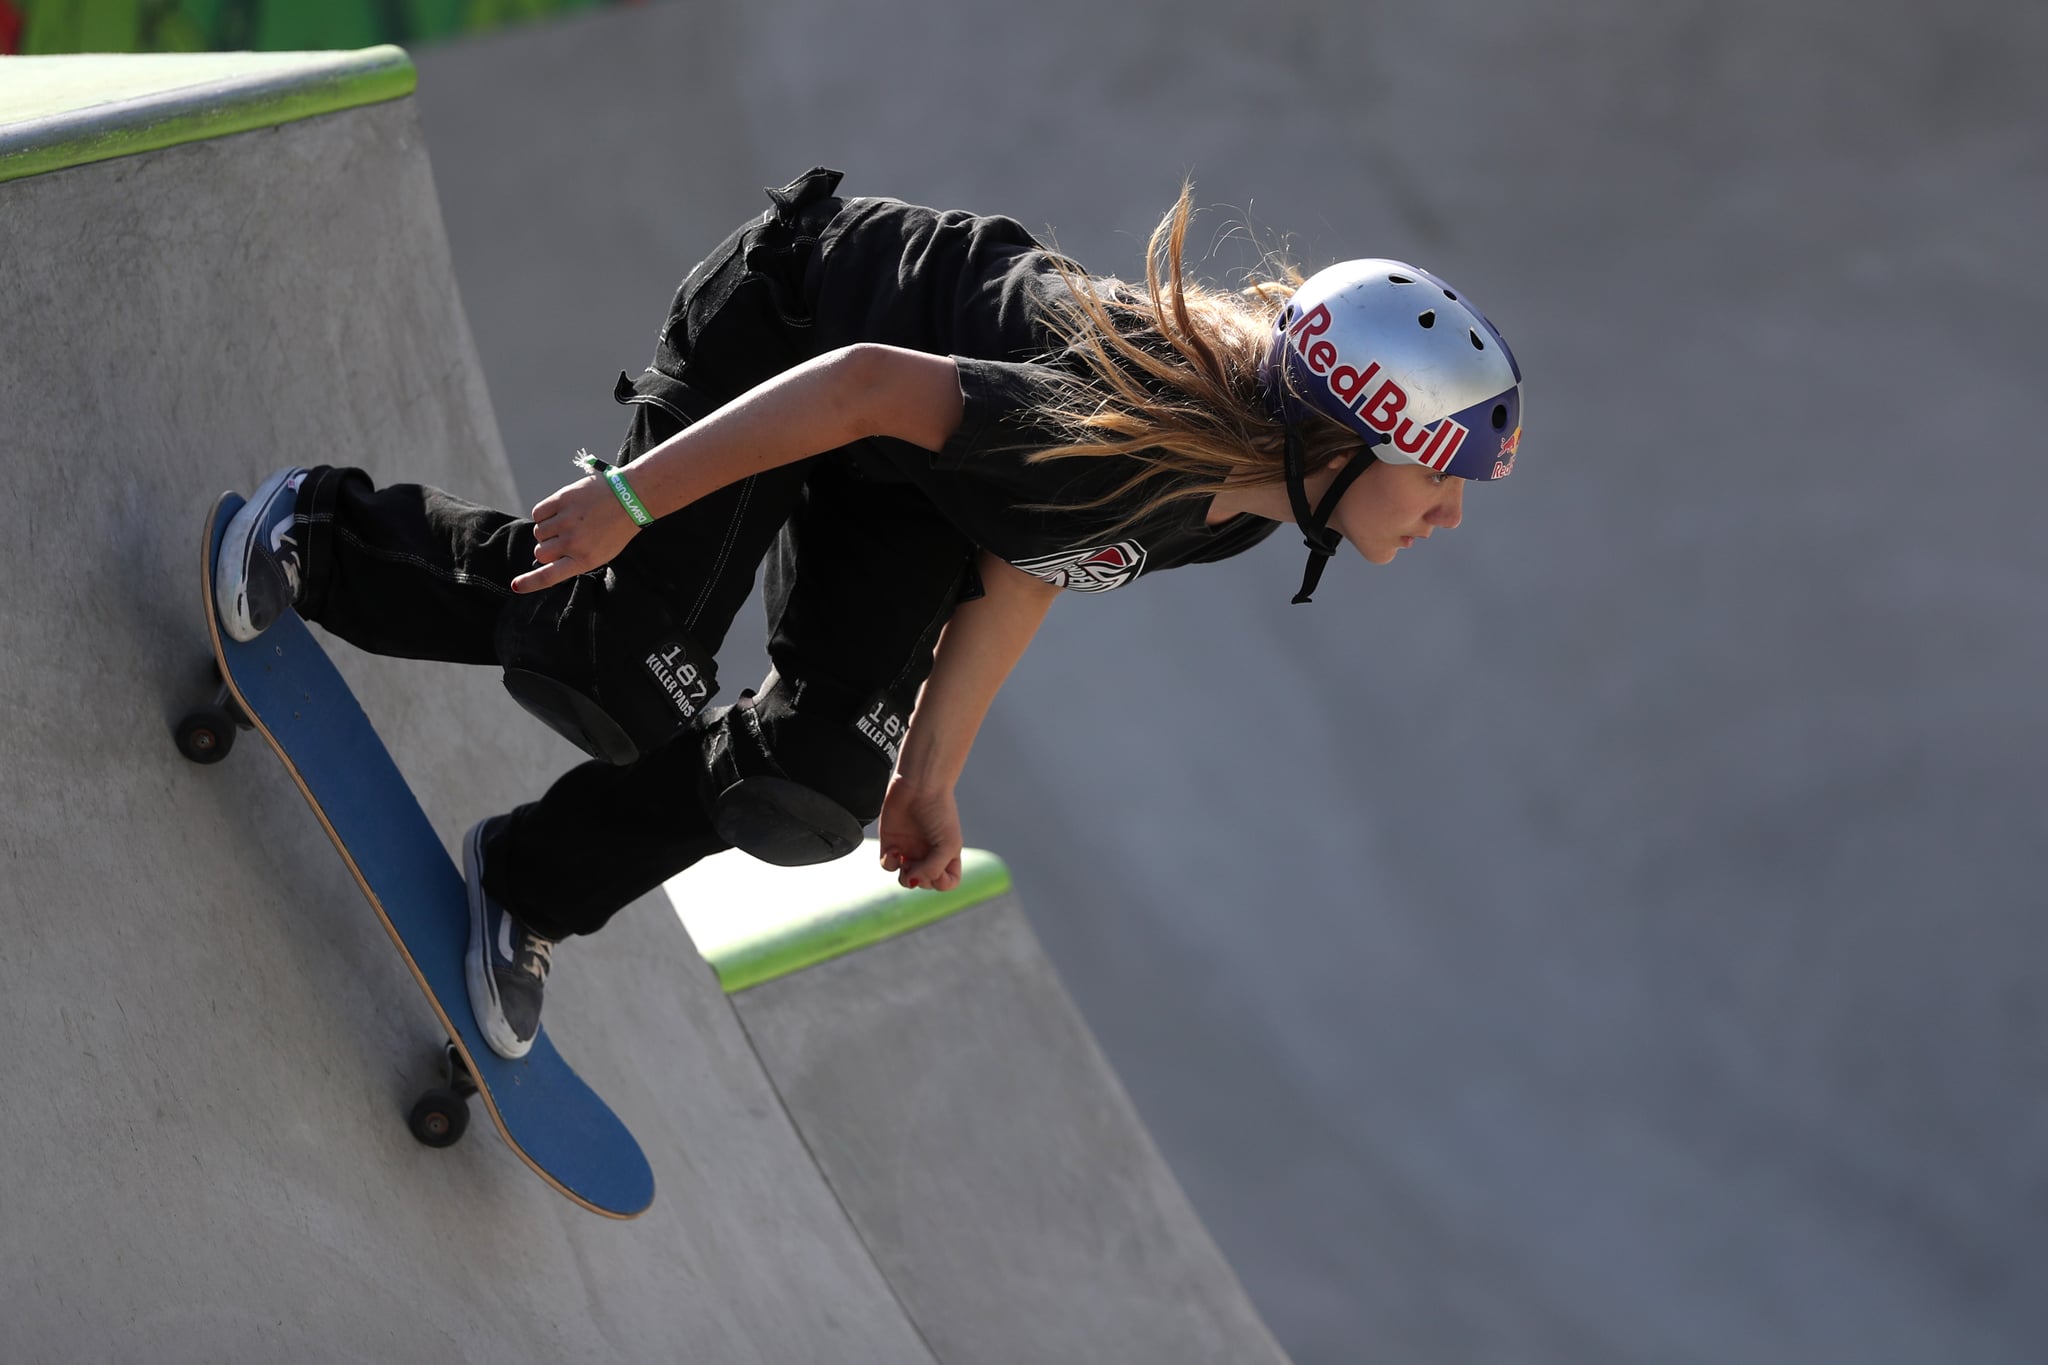 Skateboarding Olympics Athletes 8mfmutbiw0co2m / There’s a lot to